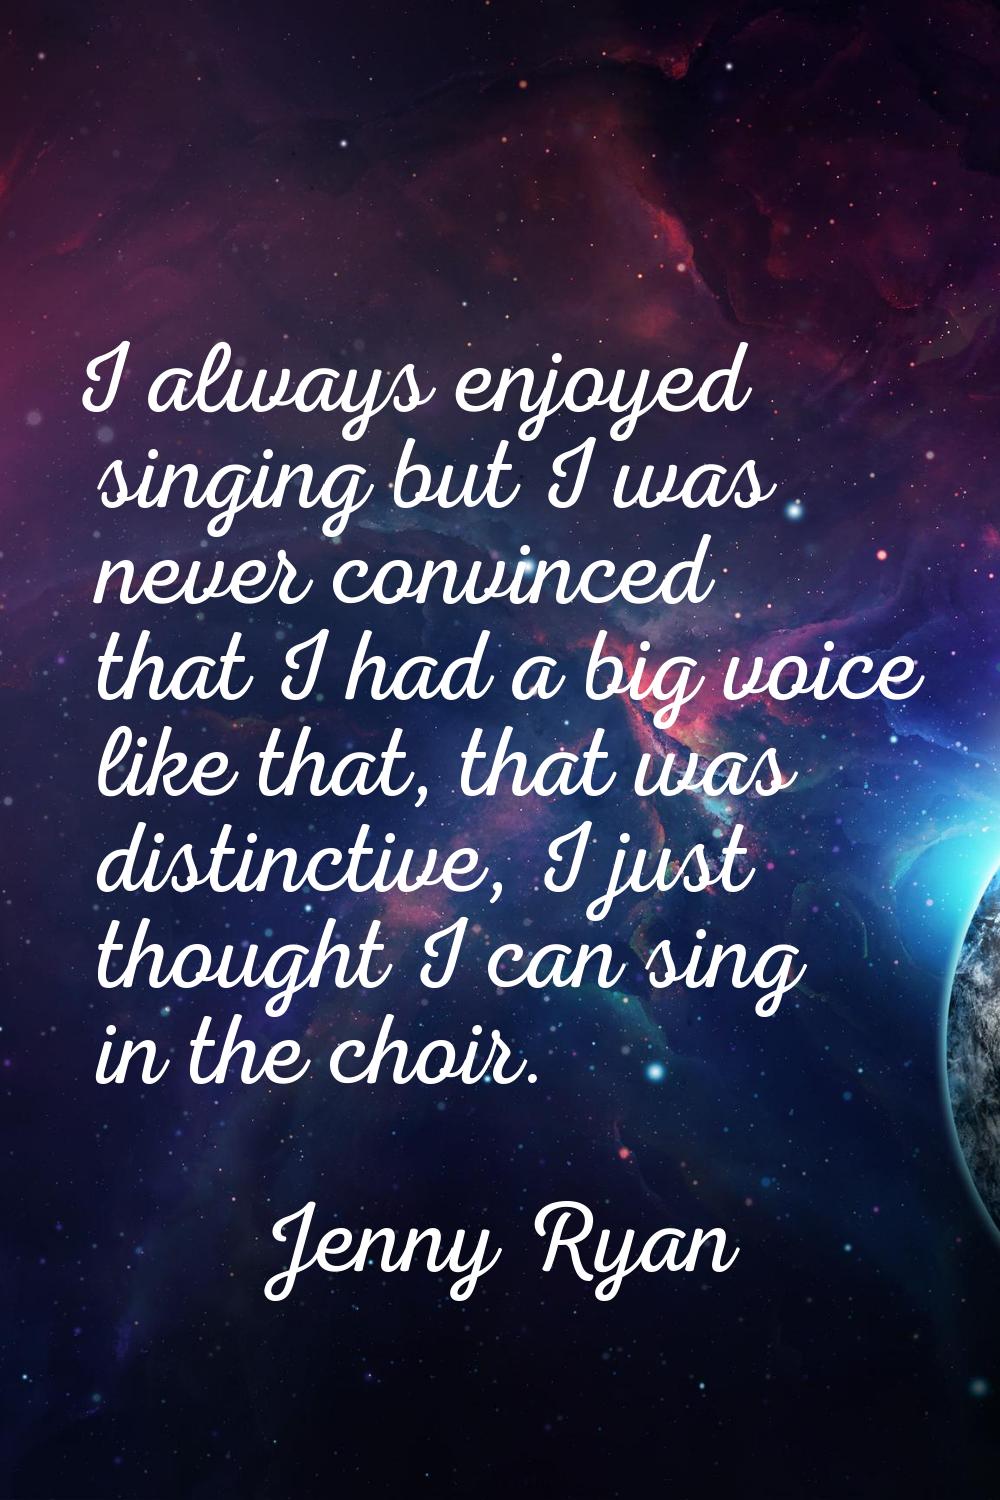 I always enjoyed singing but I was never convinced that I had a big voice like that, that was disti